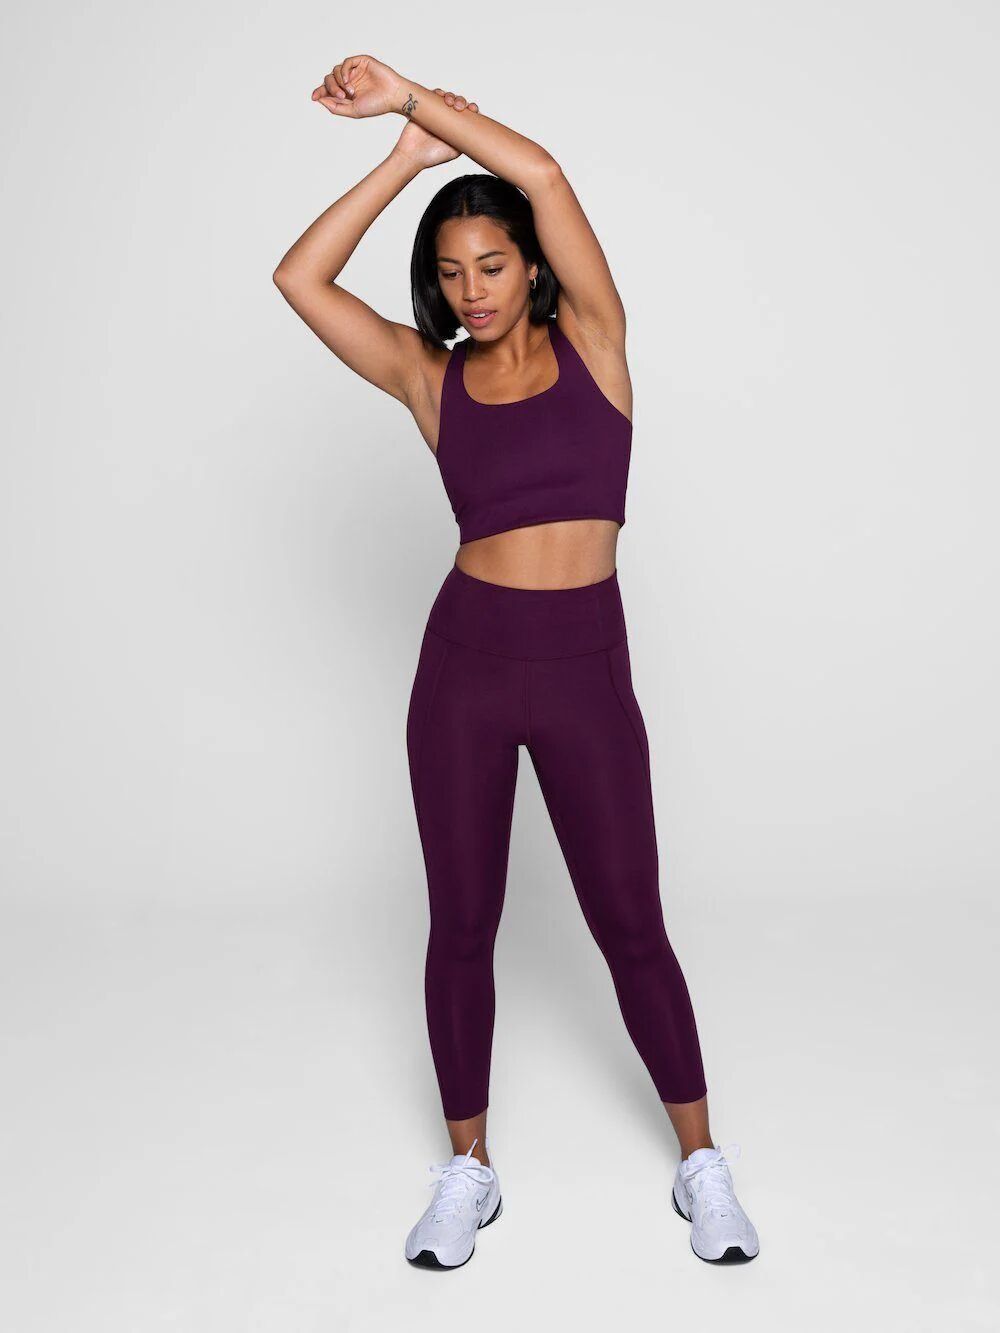 Girlfriend Collective Women's Compressive Legging - Made From Recycled Plastic Bottles, Plum / M / 7/8